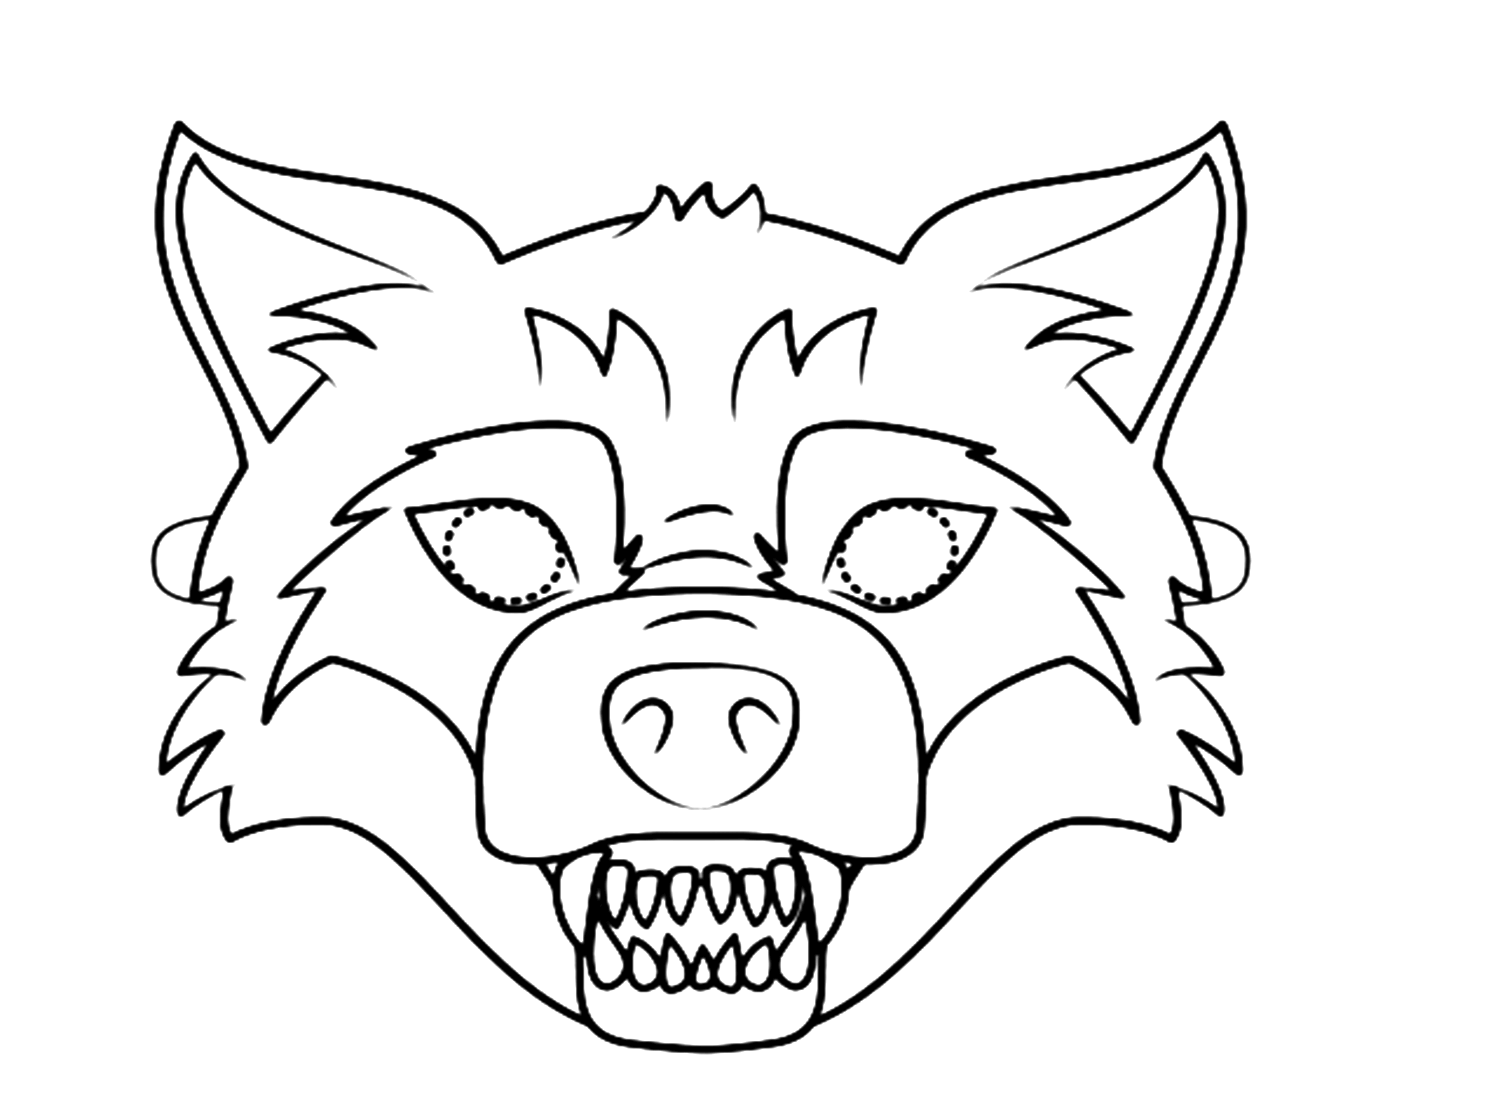 Big Bad Wolf Mask Coloring Pages - Halloween Masks Coloring Pages ...